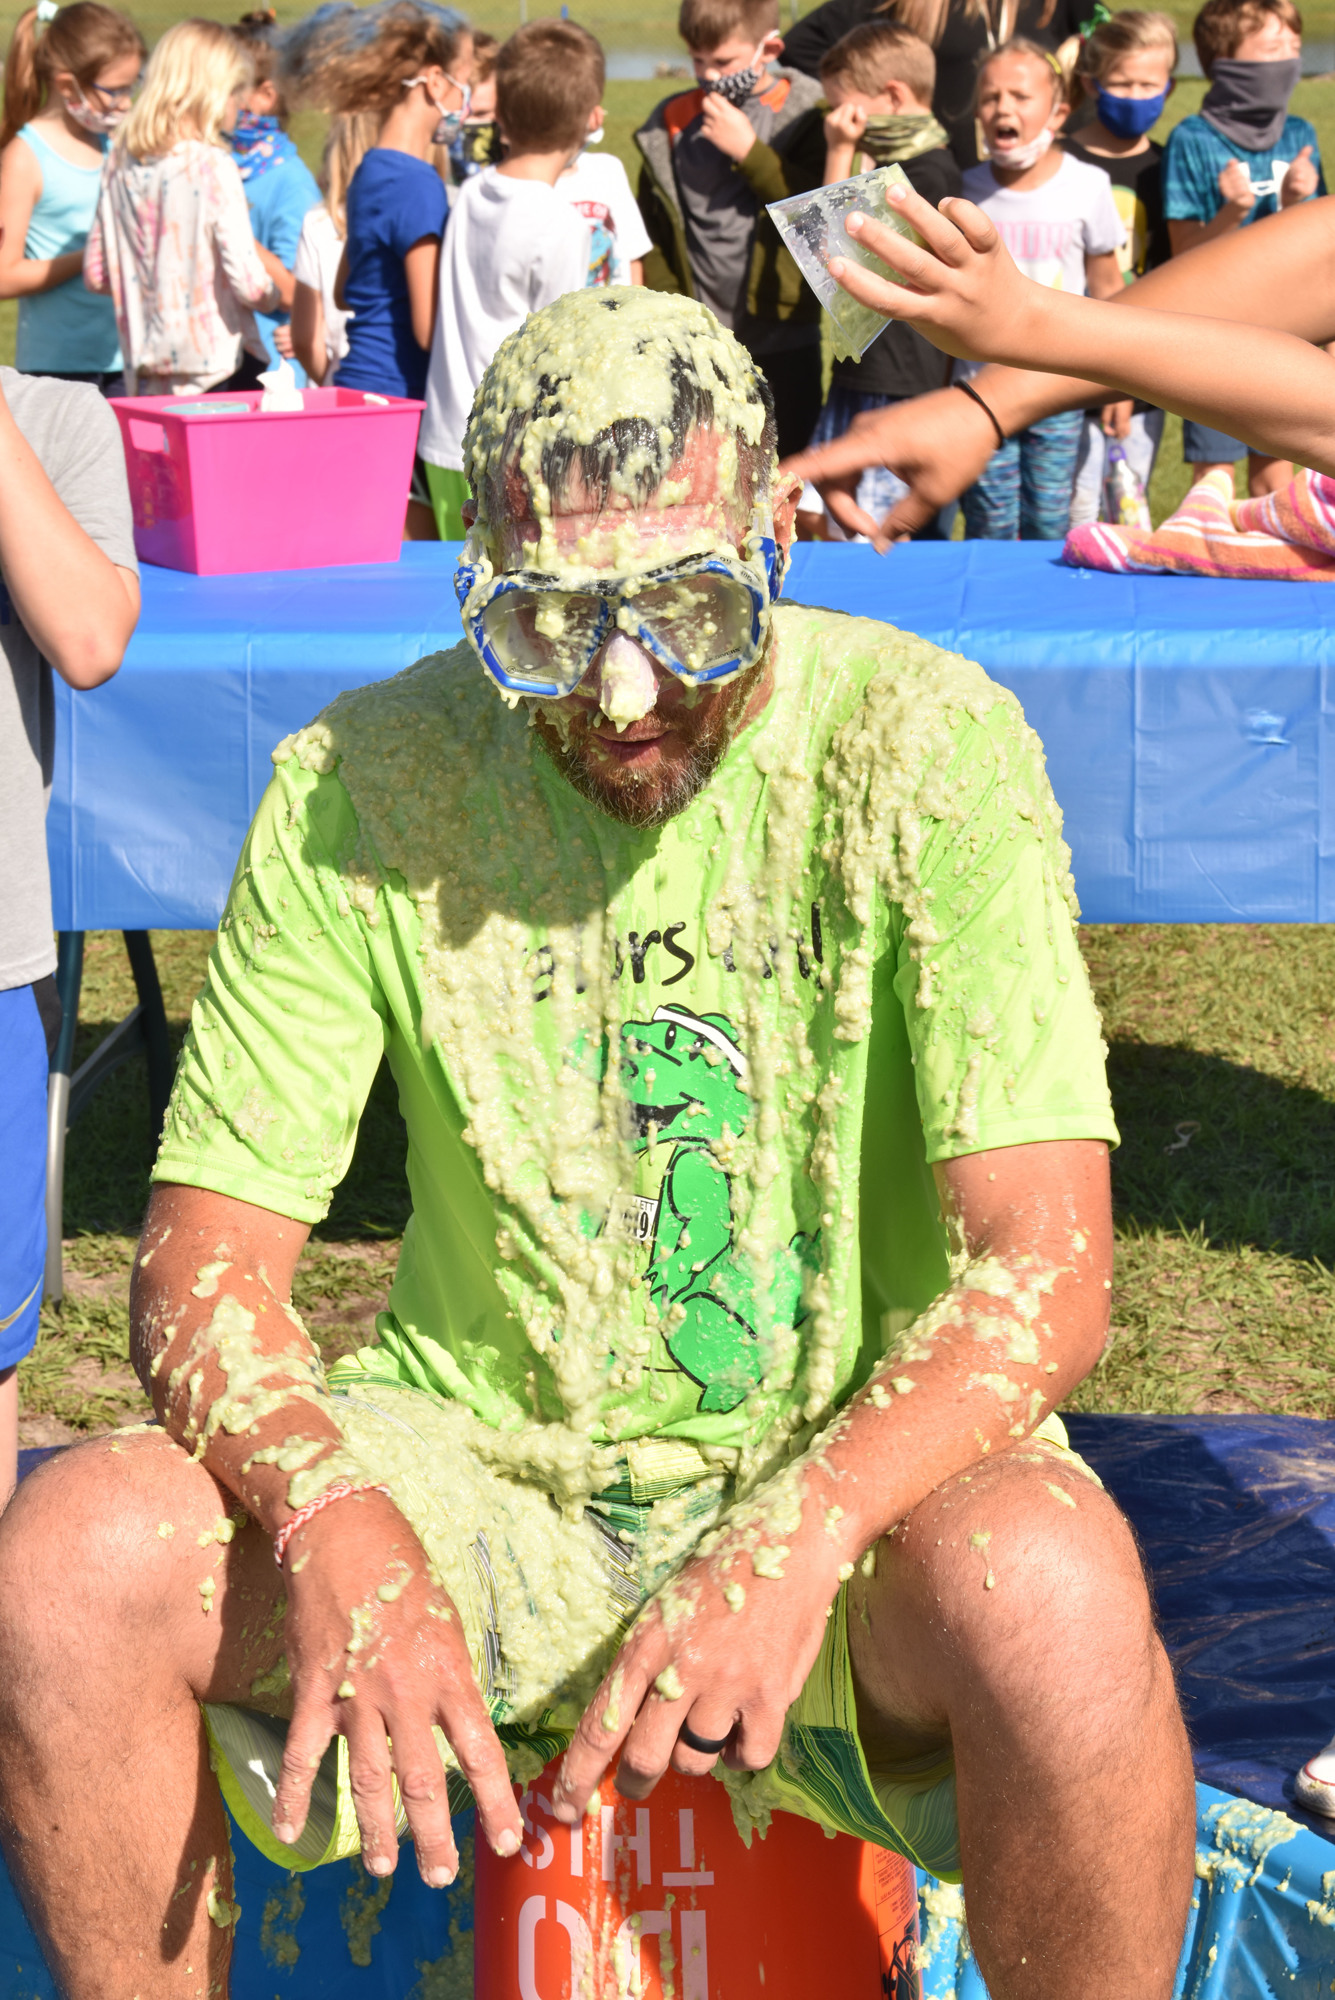 Principal Todd Richardson gets slimed by more than 250 students during the annual walk-a-thon. Richardson's incentives helped the school raise nearly $70,000, the highest in the school's history. Courtesy photo.